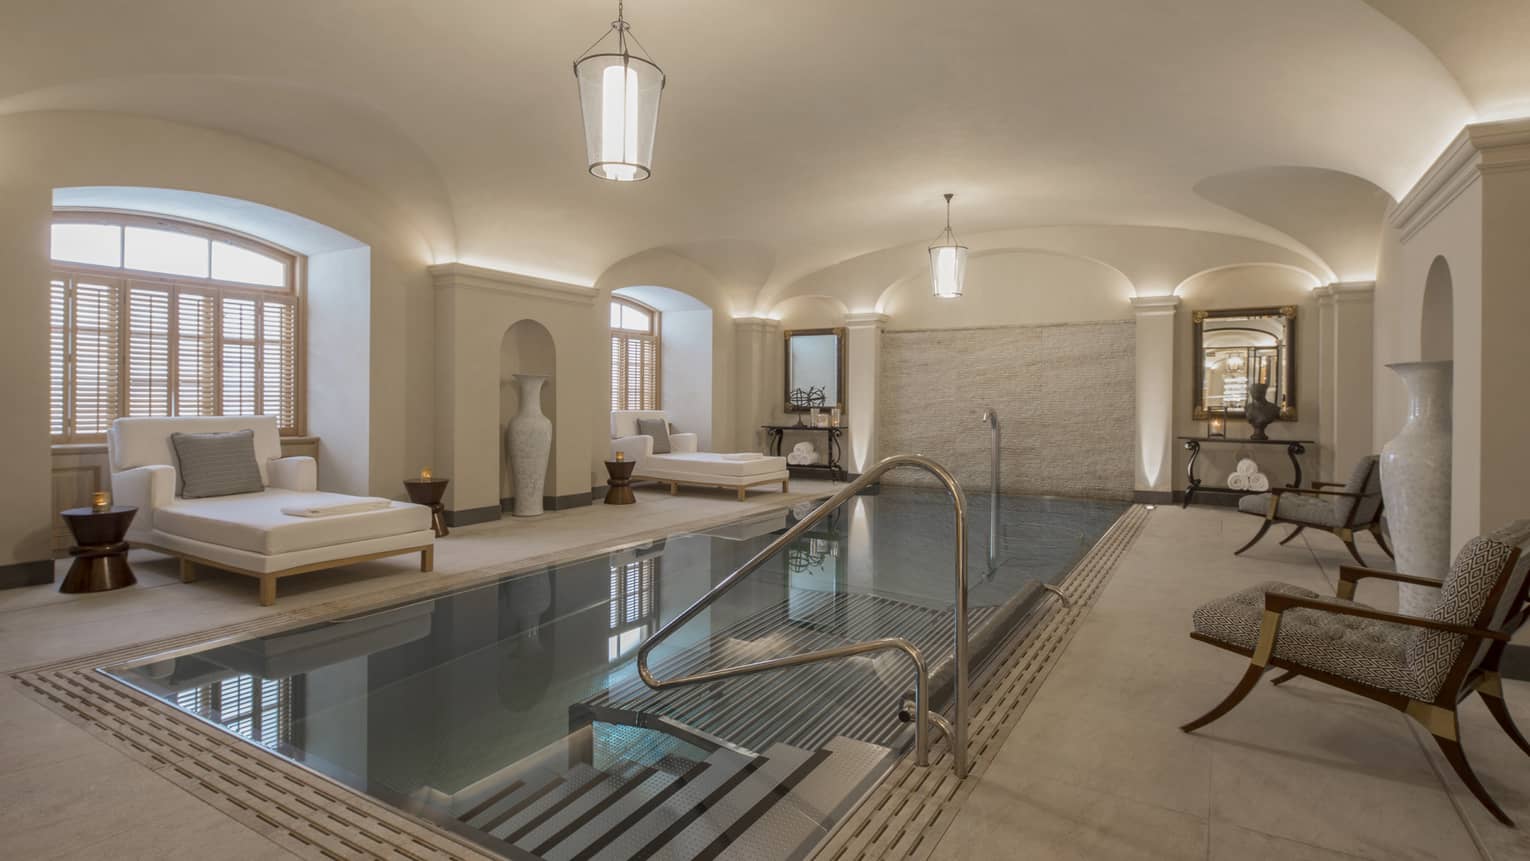 AVA Spa vitality pool  flanked by white lounge chairs under domed ceiling